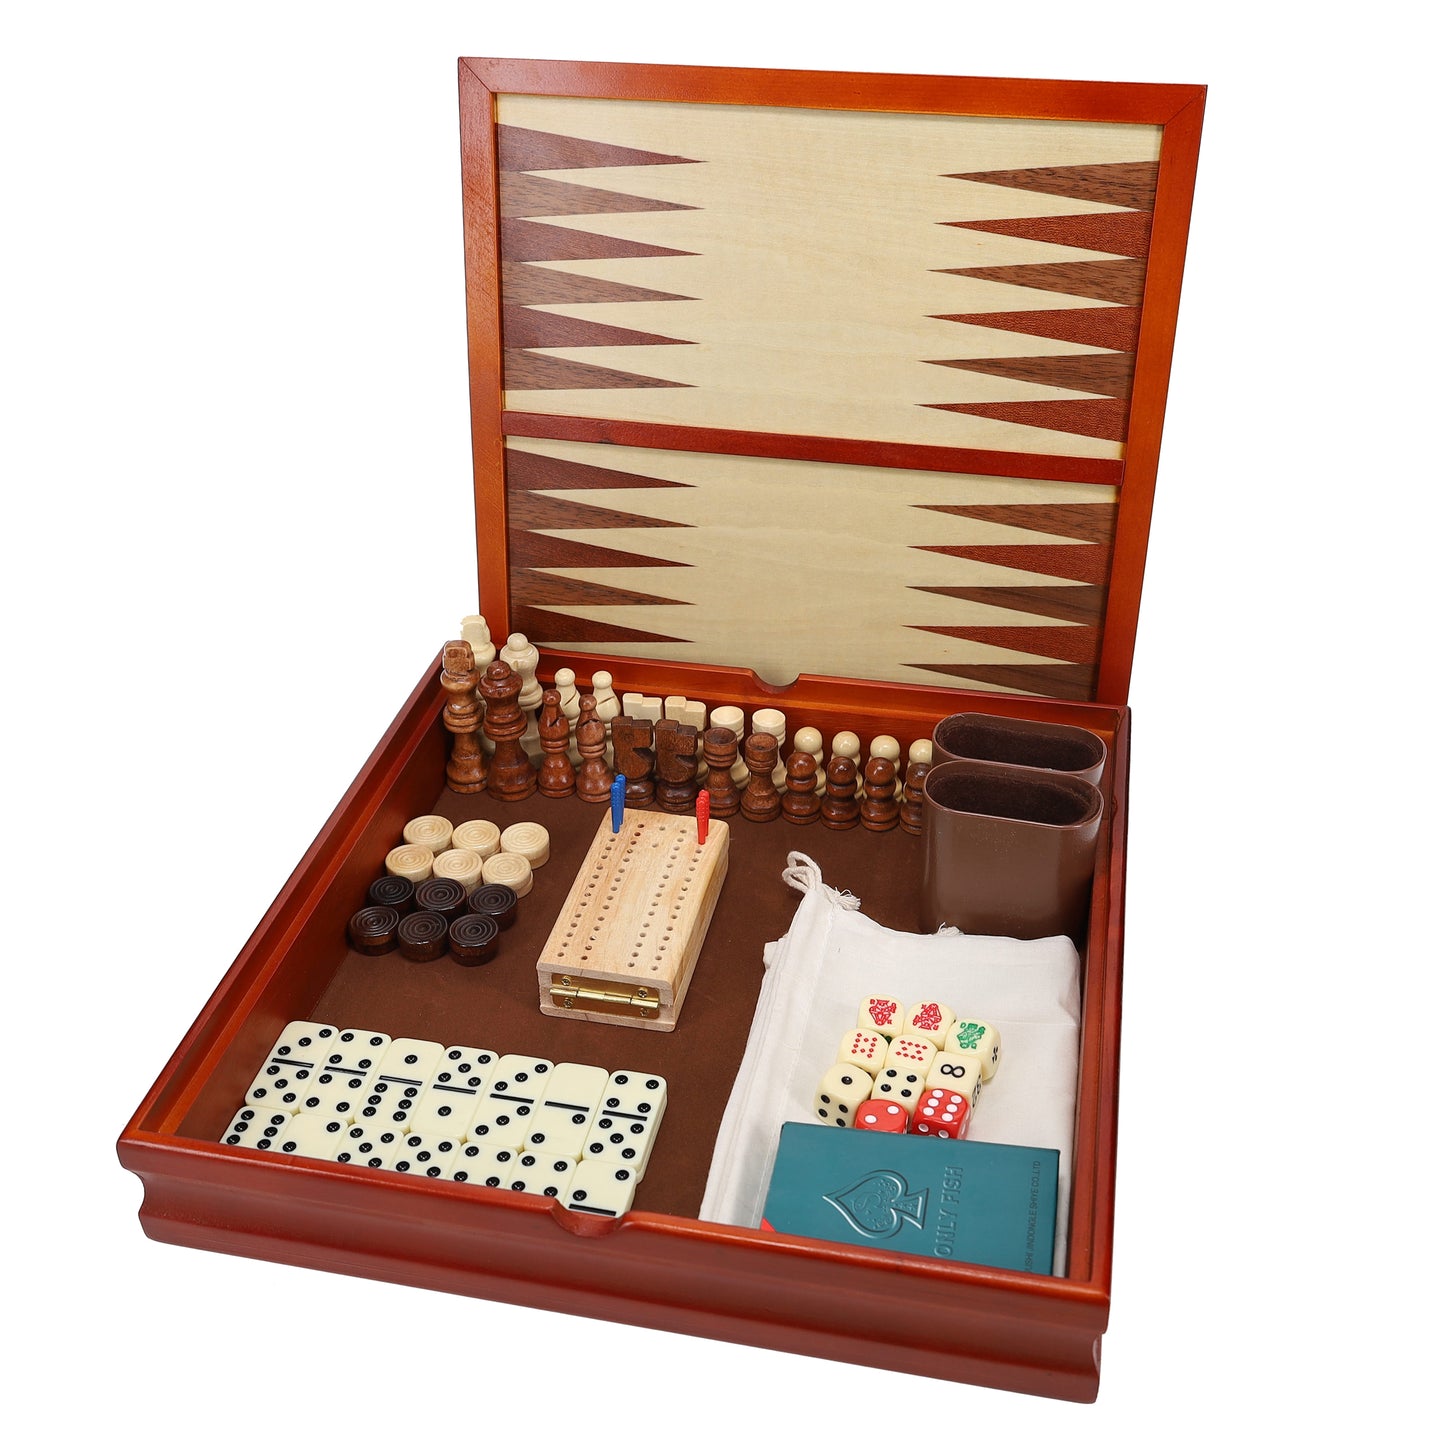 7-in-1 Combination Wood Game Set – 12 inch board – Includes Chess, Checkers, Backgammon, Dominoes, Cribbage, Poker Dice, Cards